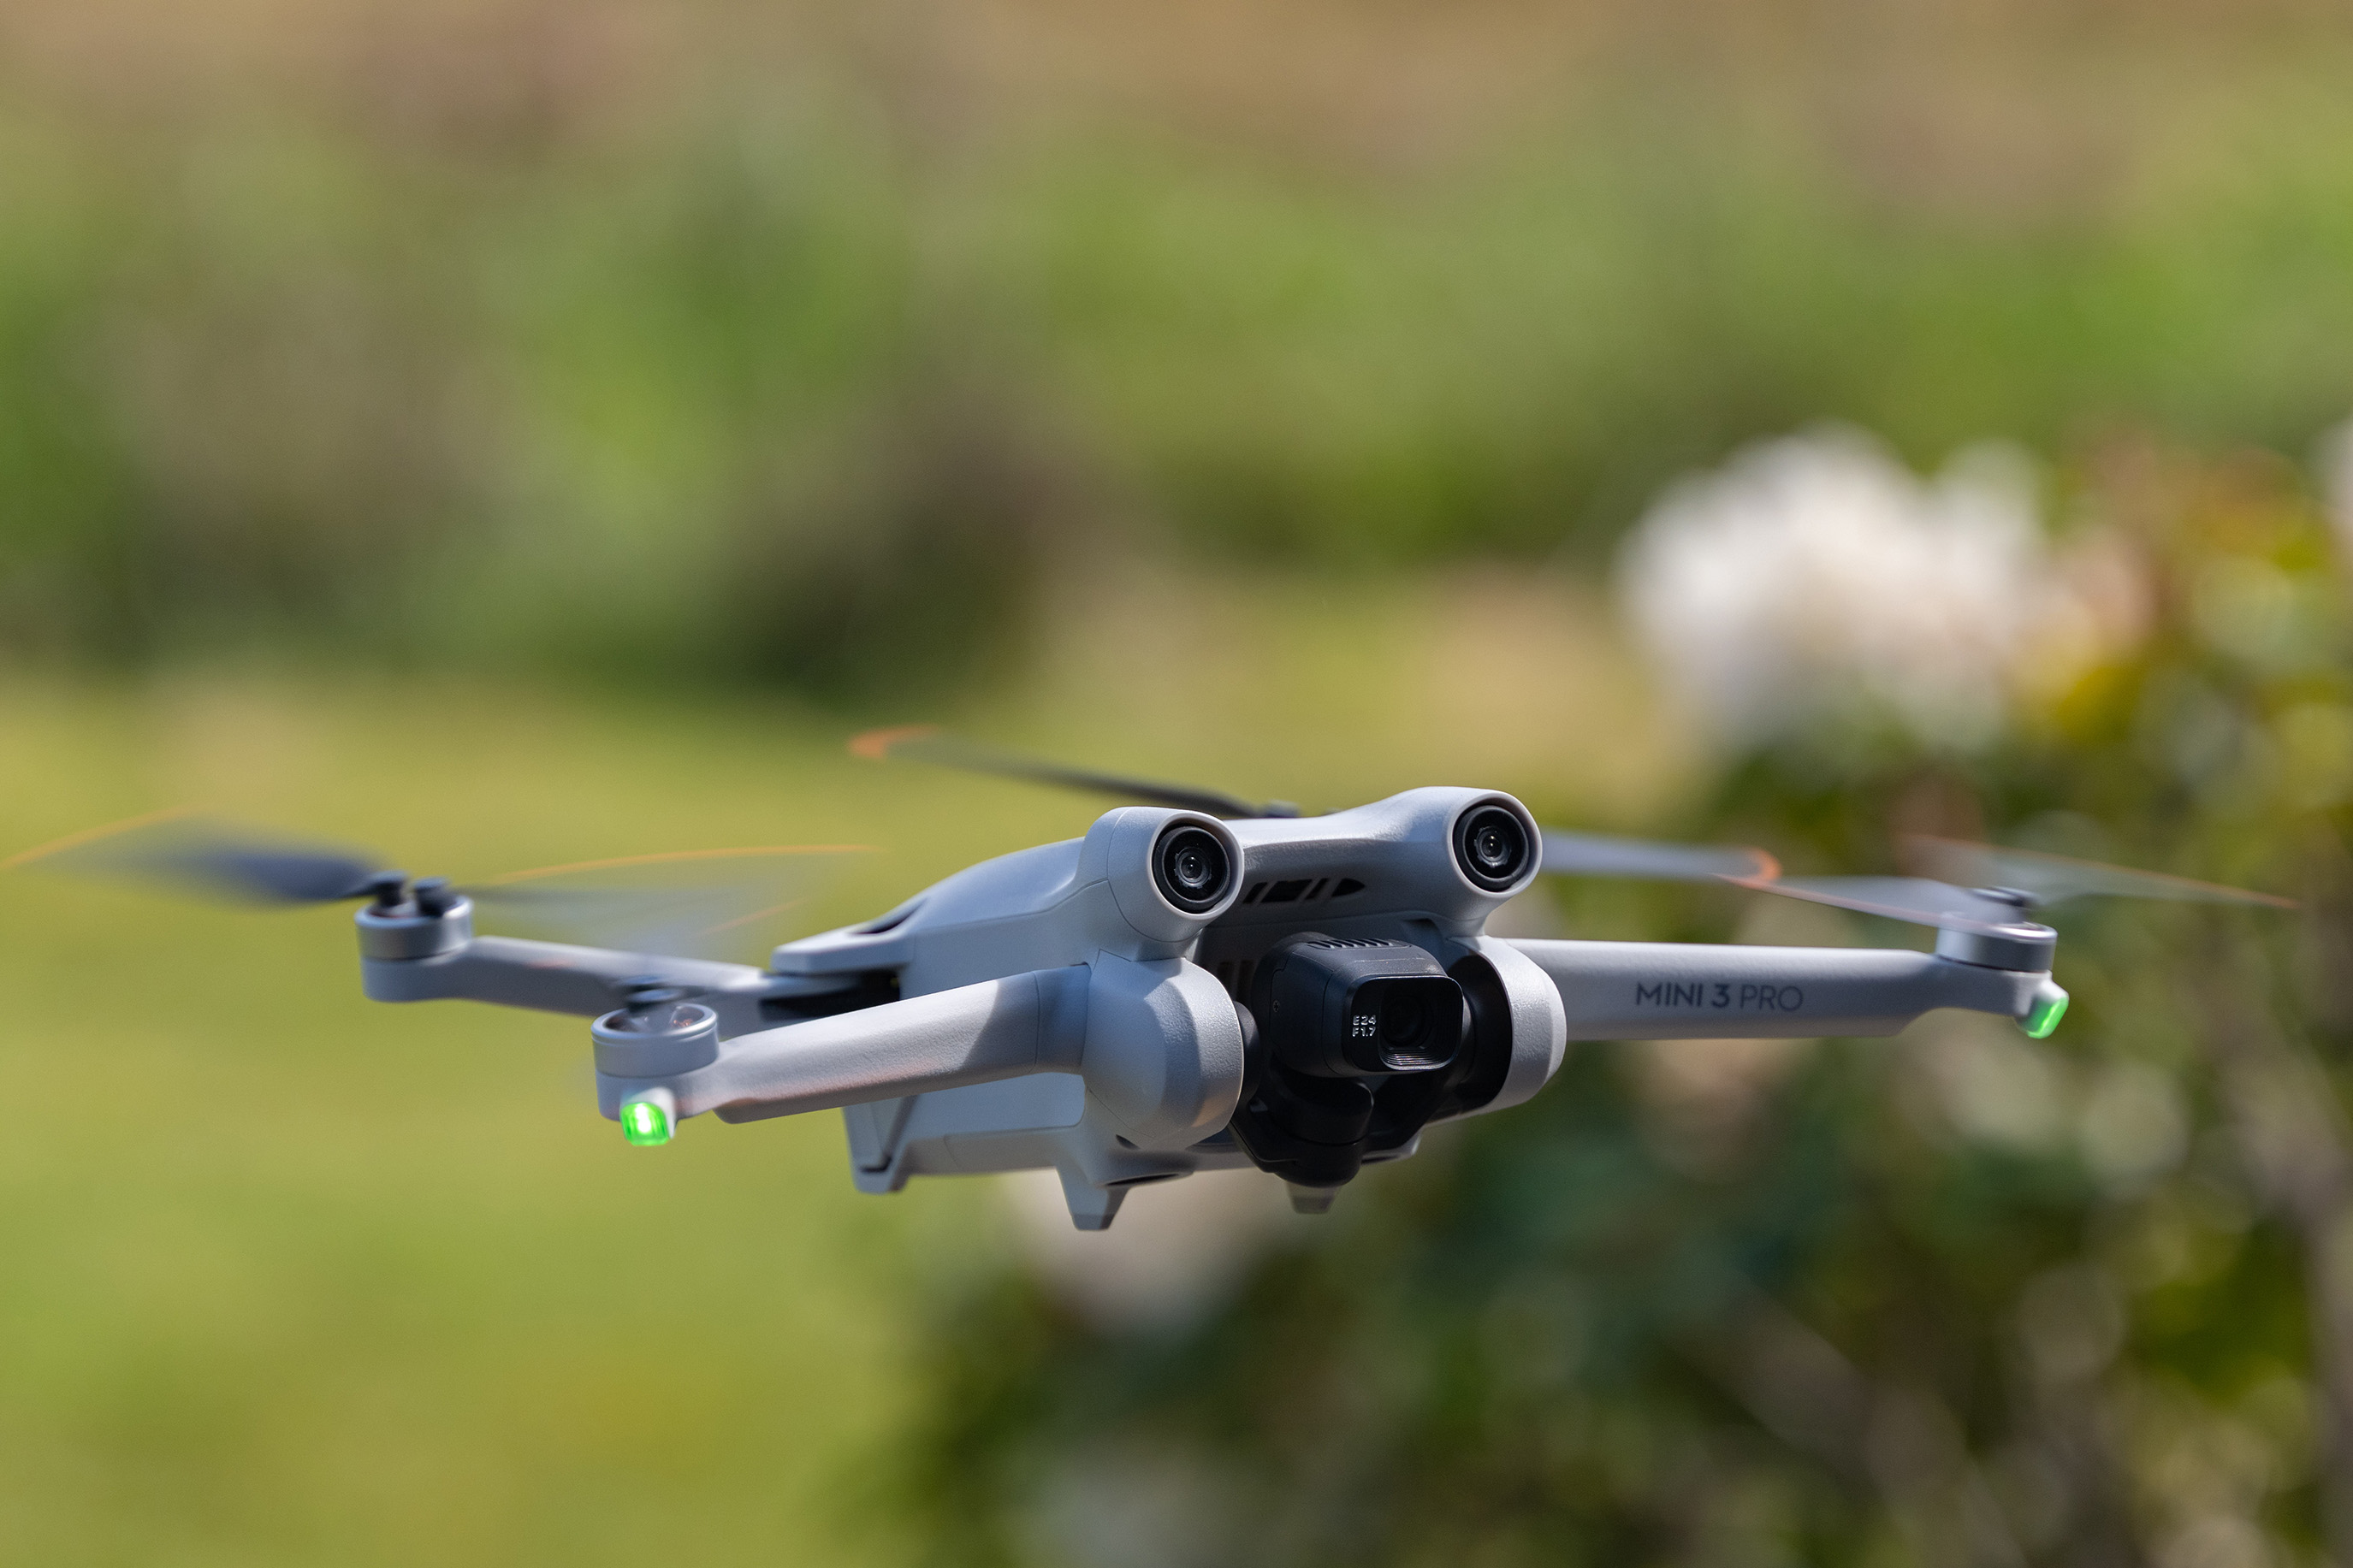 | Deals: a Drone More $49 Get Drone Best and for Digital Cheap Trends